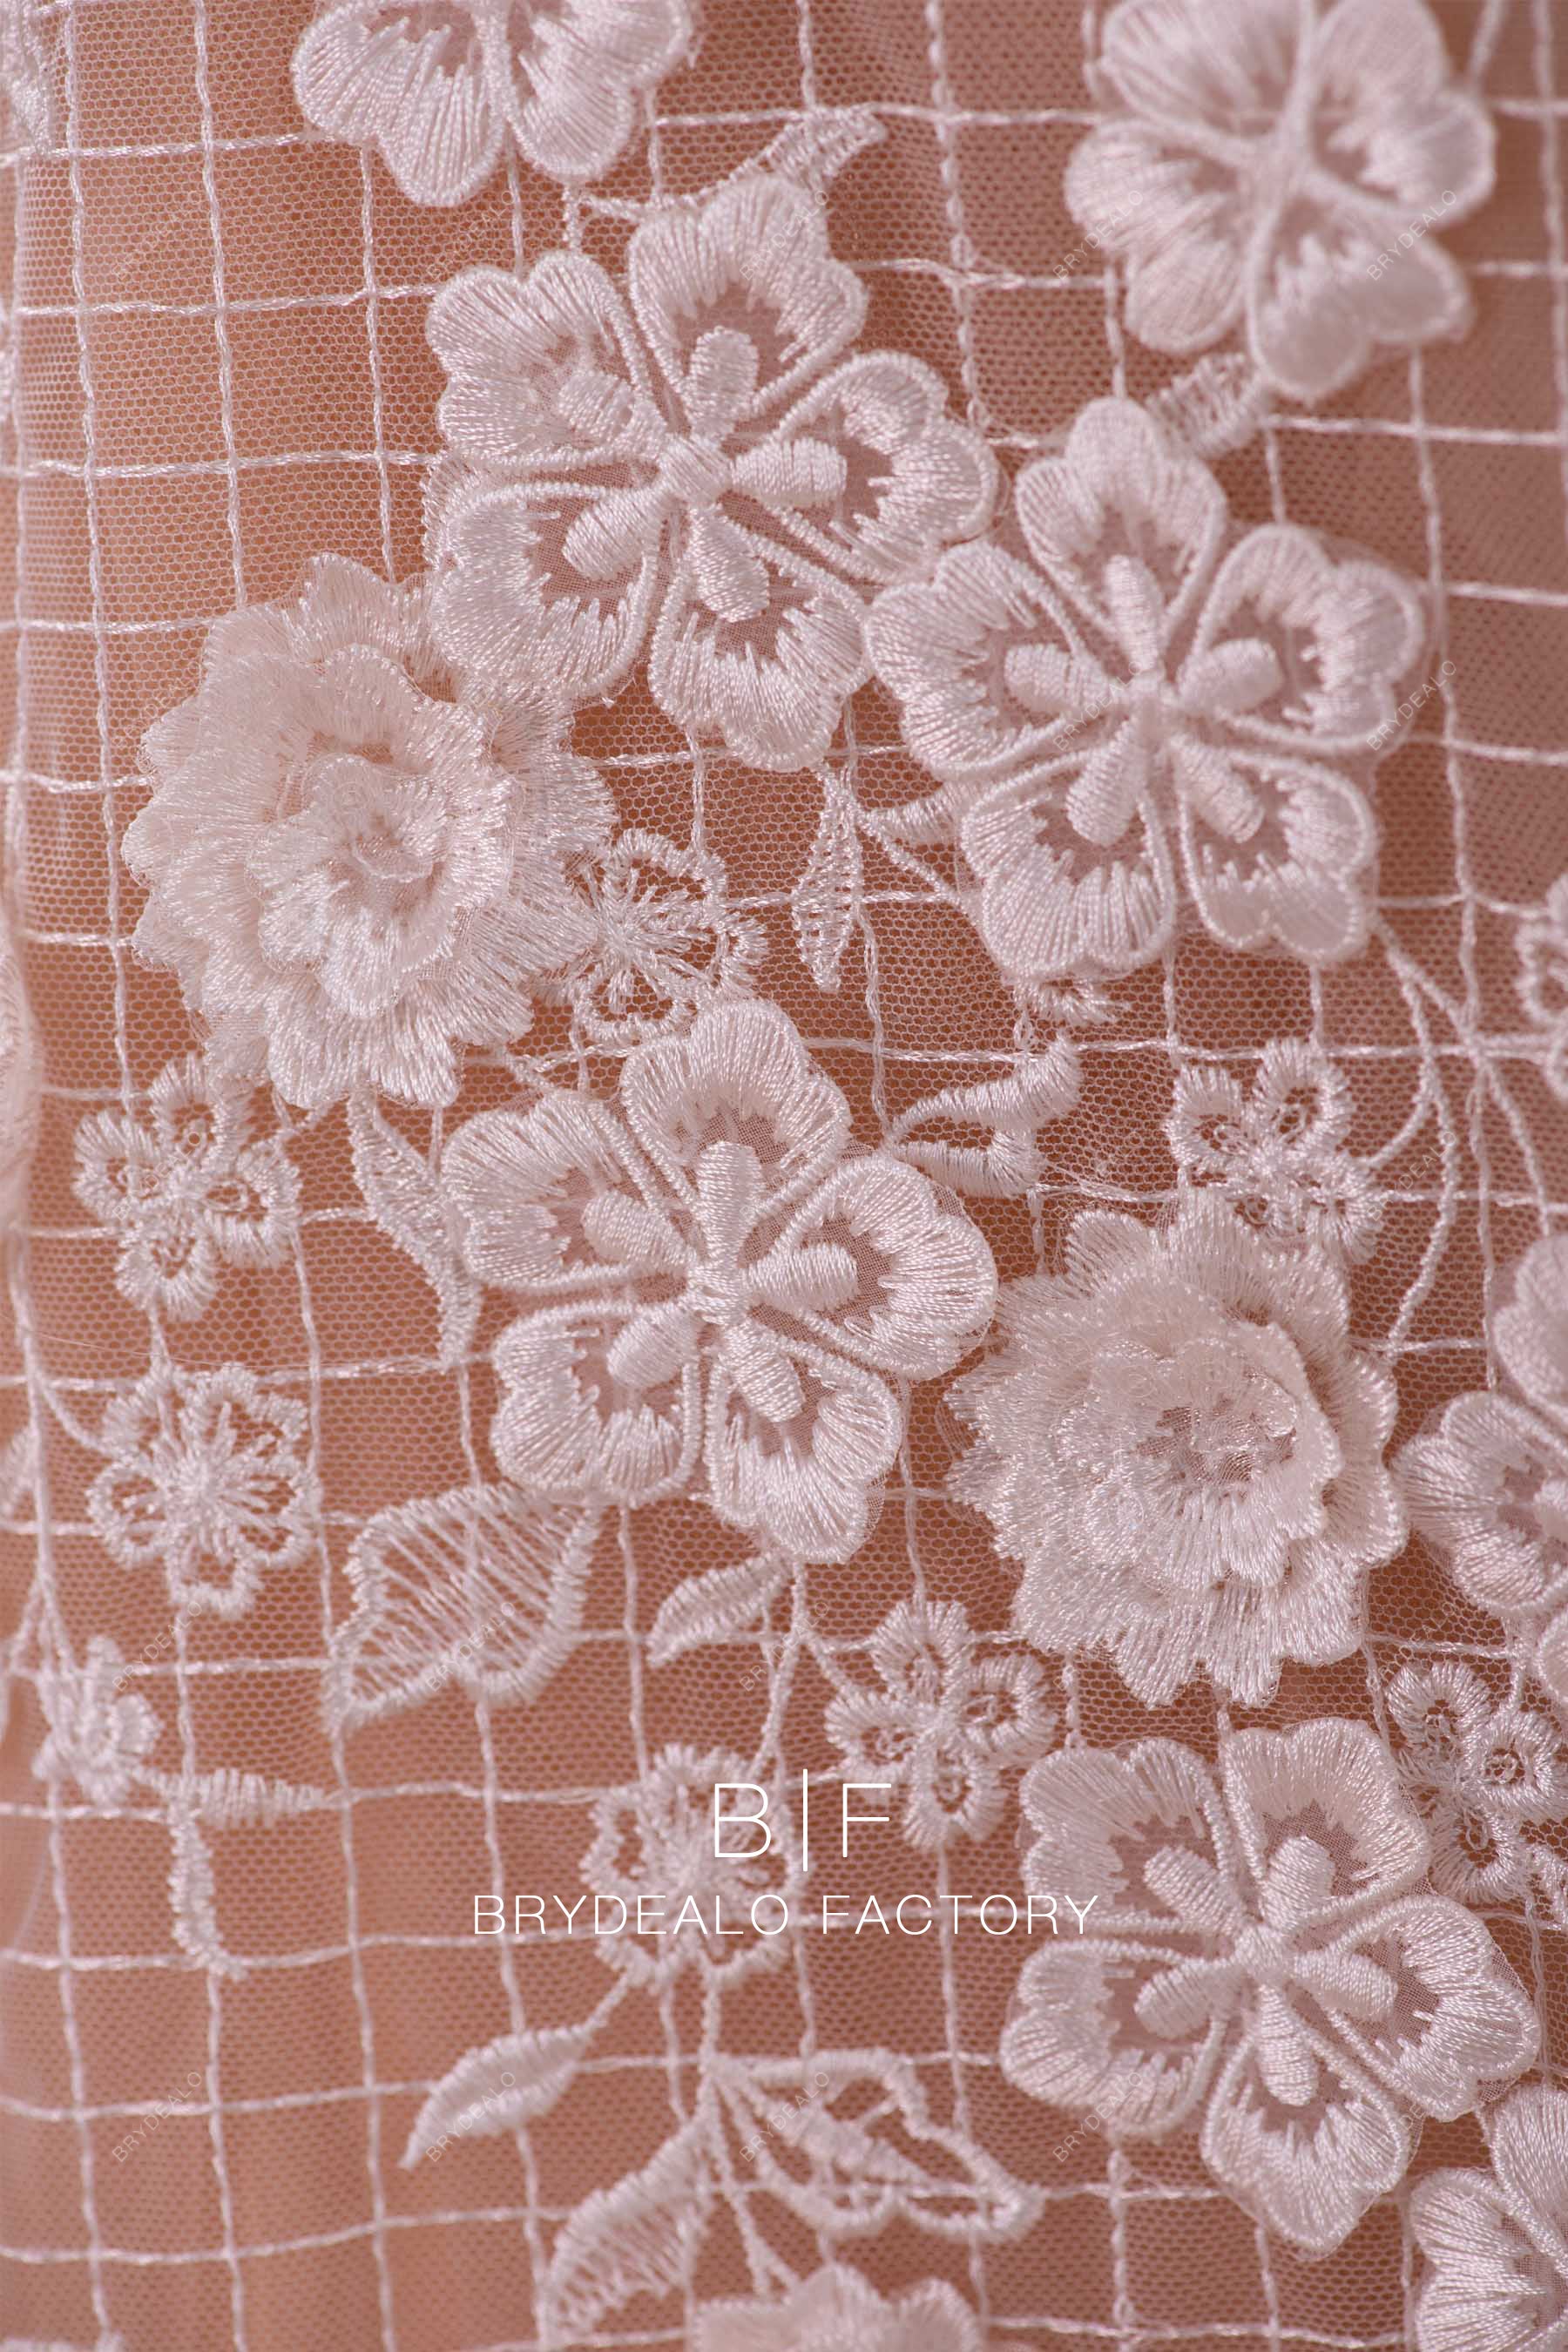 embroidery 3D flower lace